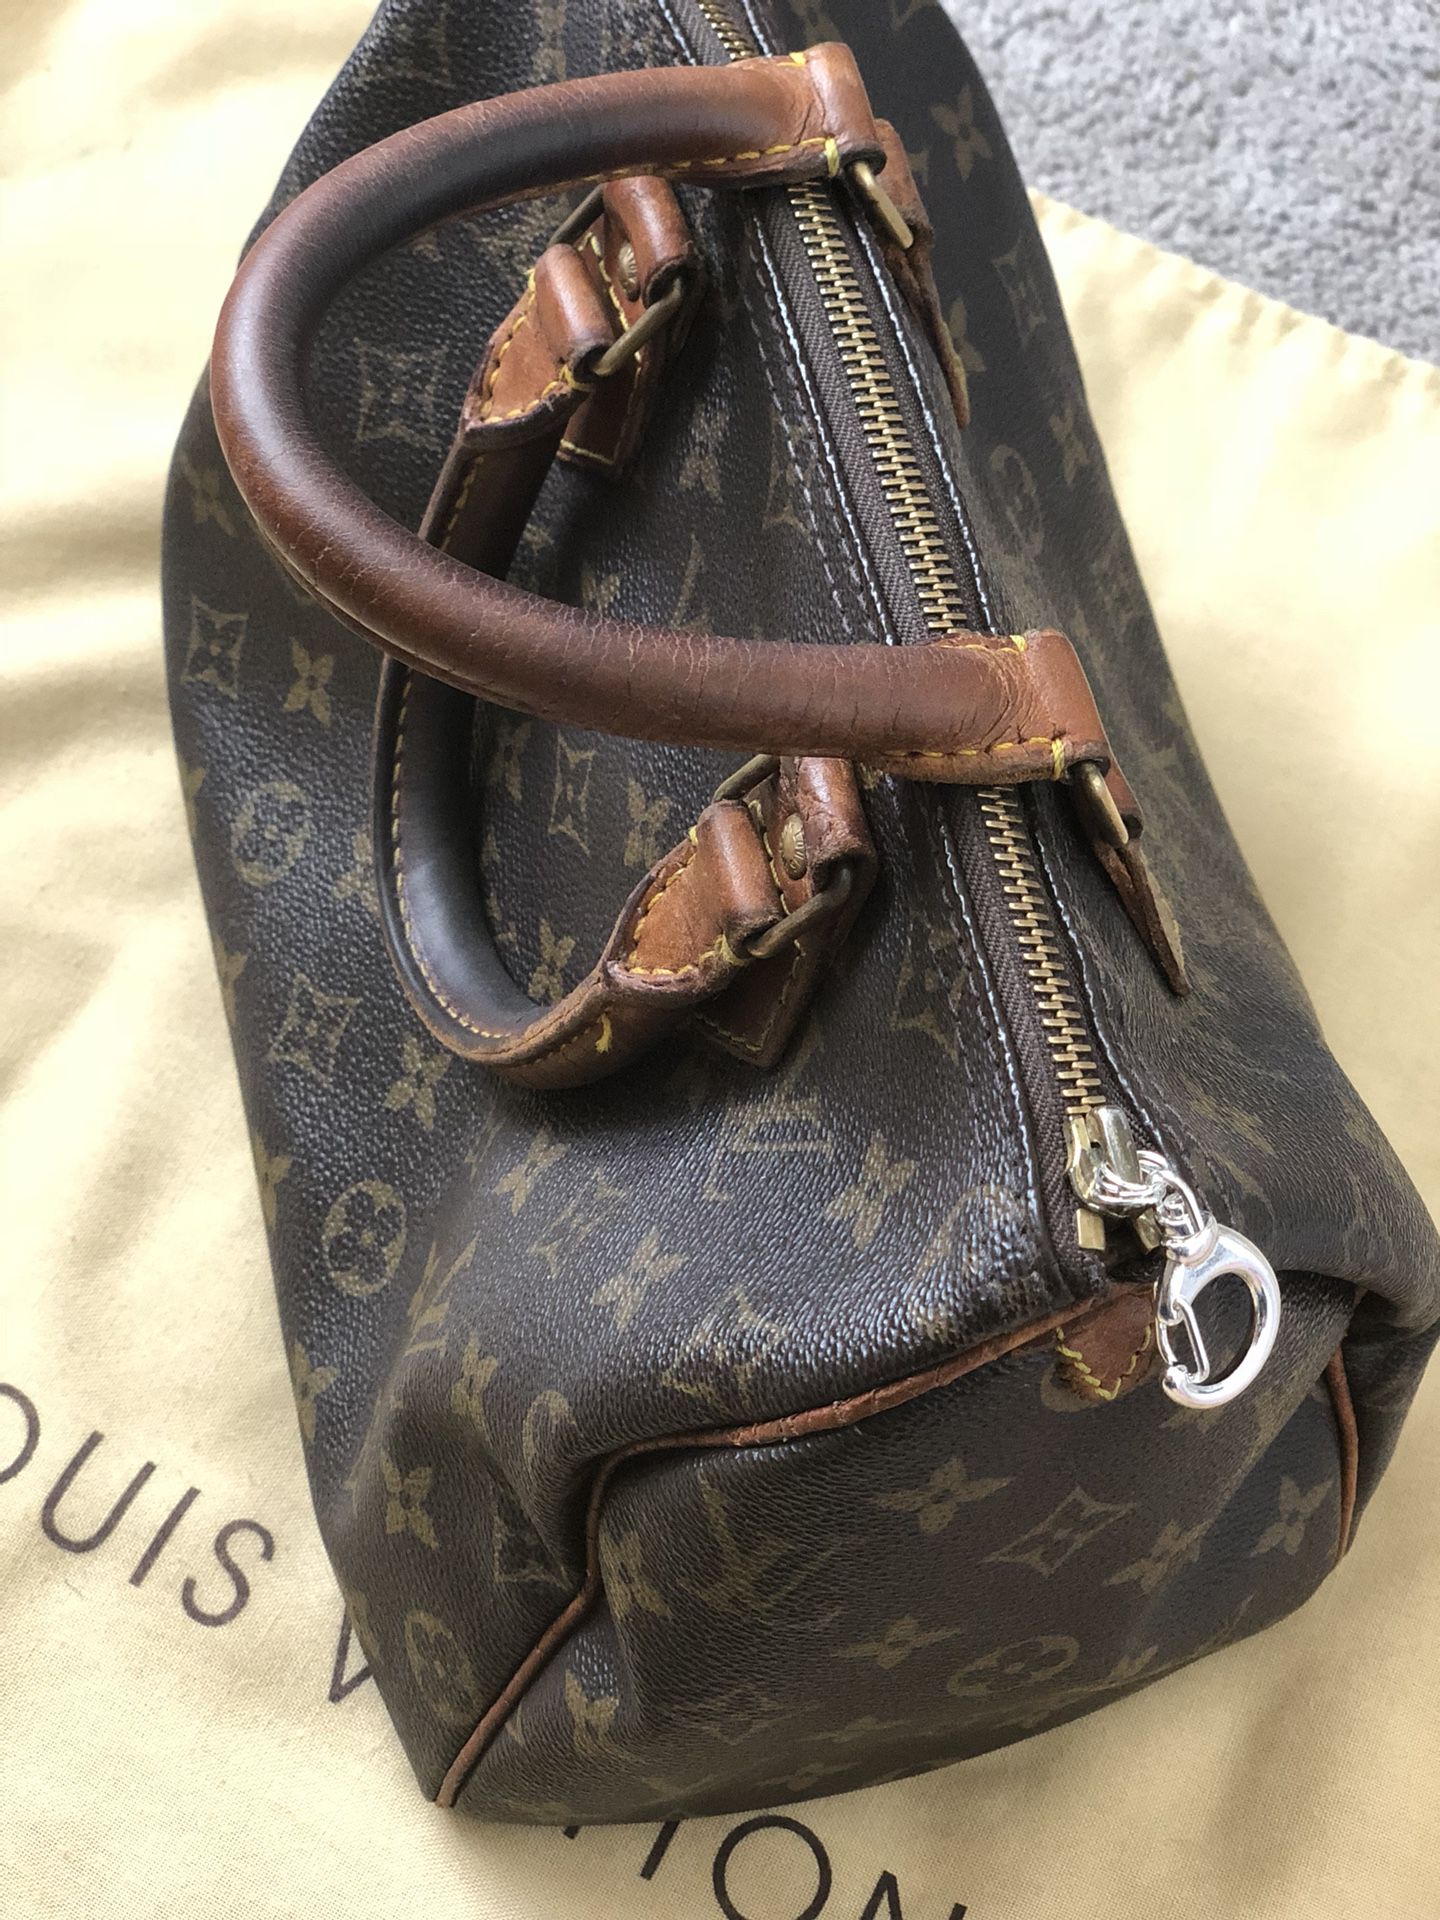 Authentic Louis Vuitton Speedy 25 for Sale in Kissimmee, FL - OfferUp